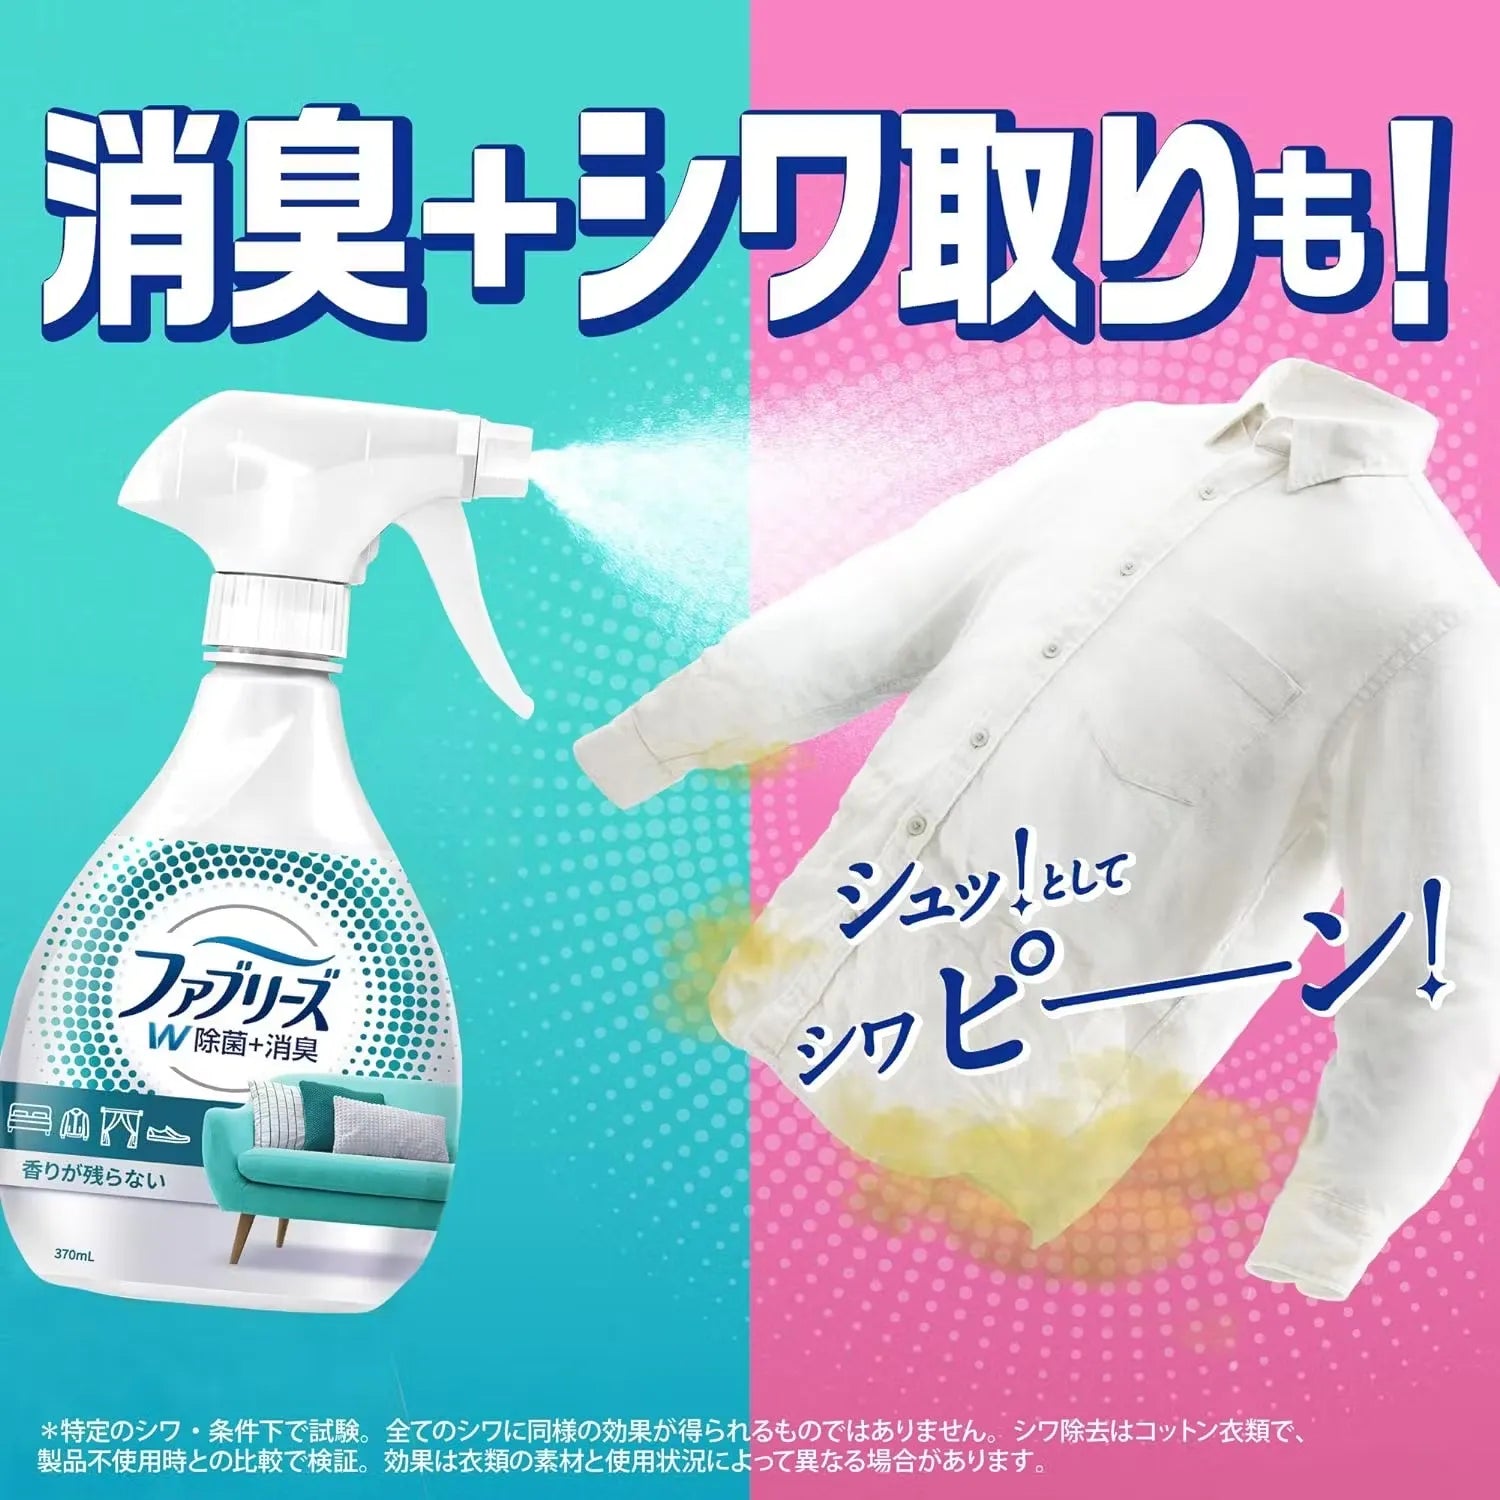 Close-up of Febreze W Fabric Disinfectant & Deodorizer Spray bottle (370ml) with a subtle flower design and text highlighting its disinfecting and deodorizing properties.